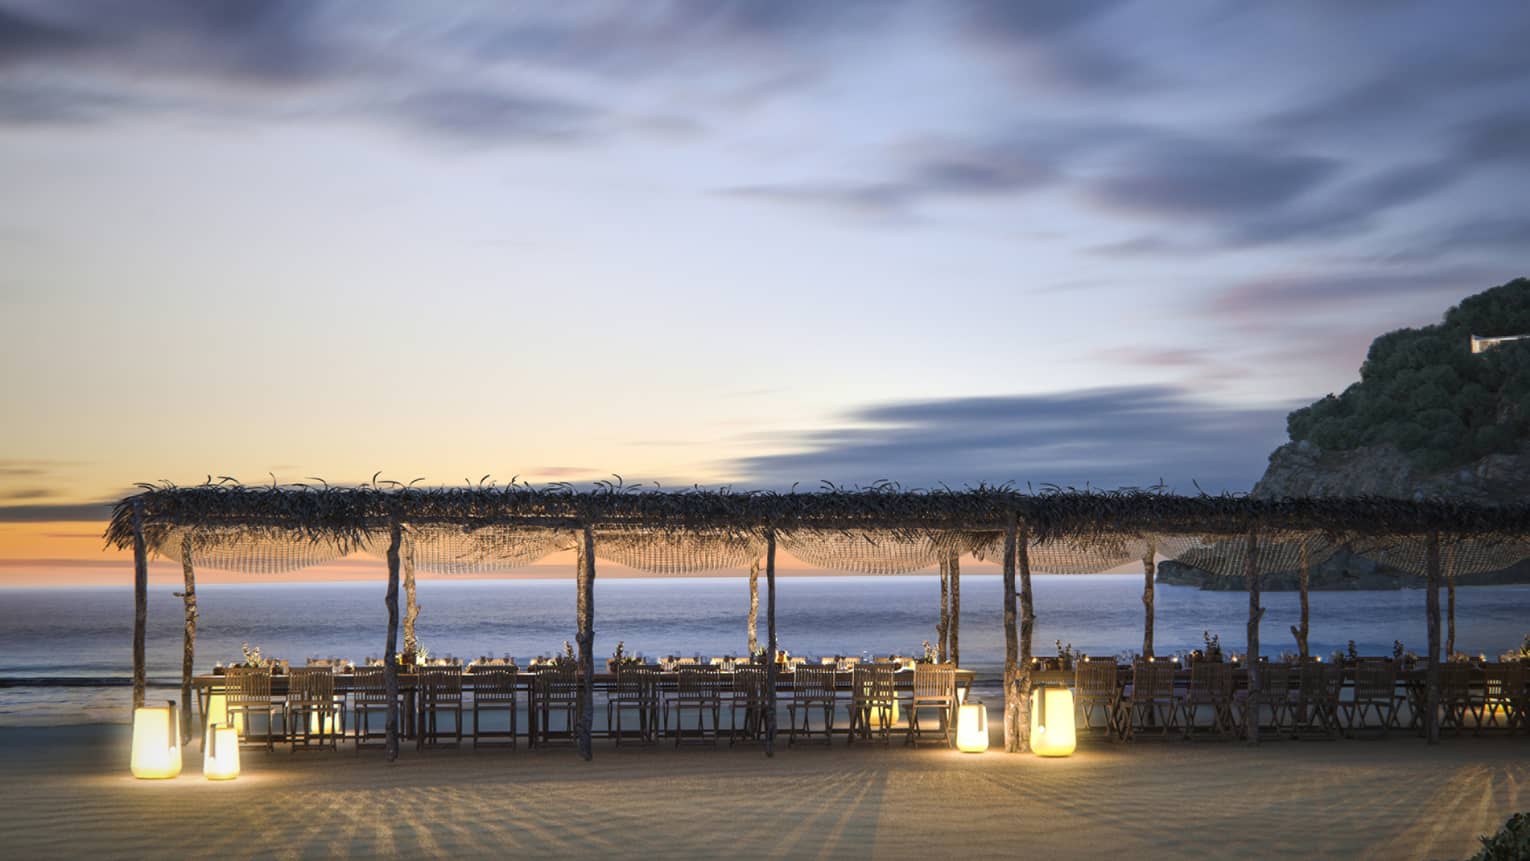 Long table and pergola on the beach, set for private event at dusk